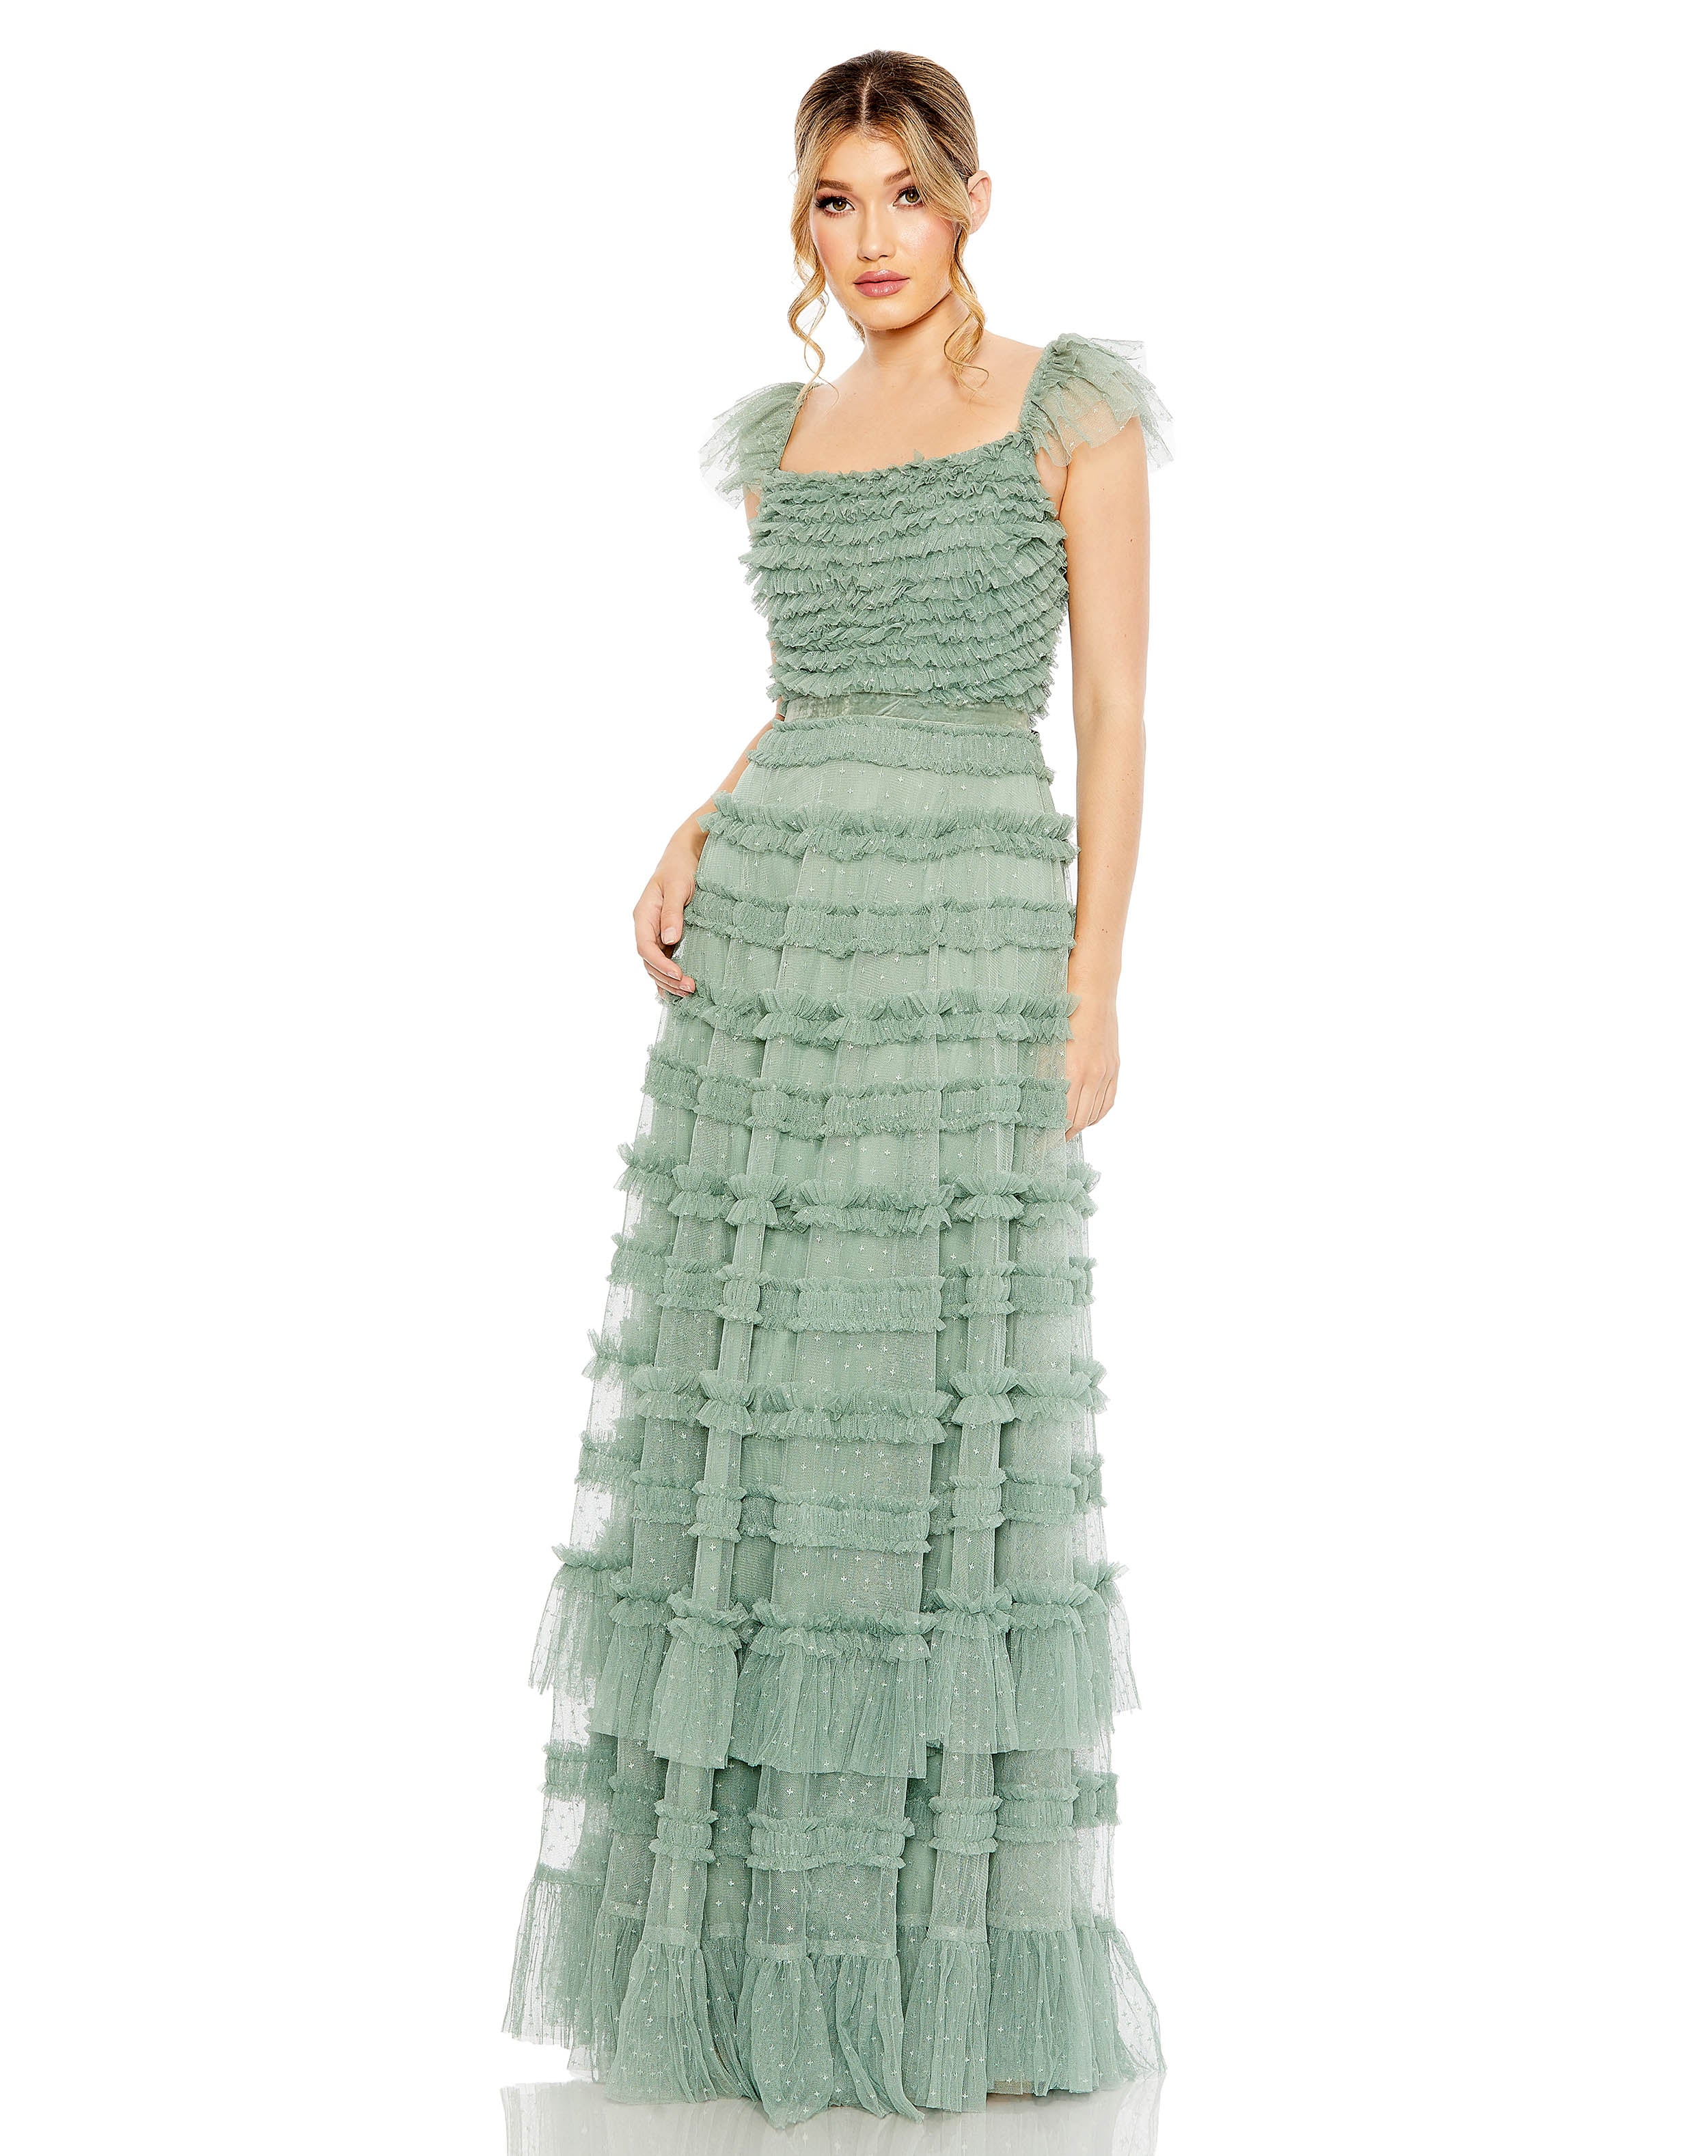 Ruffle Cap Sleeve Embellished Tiered Gown